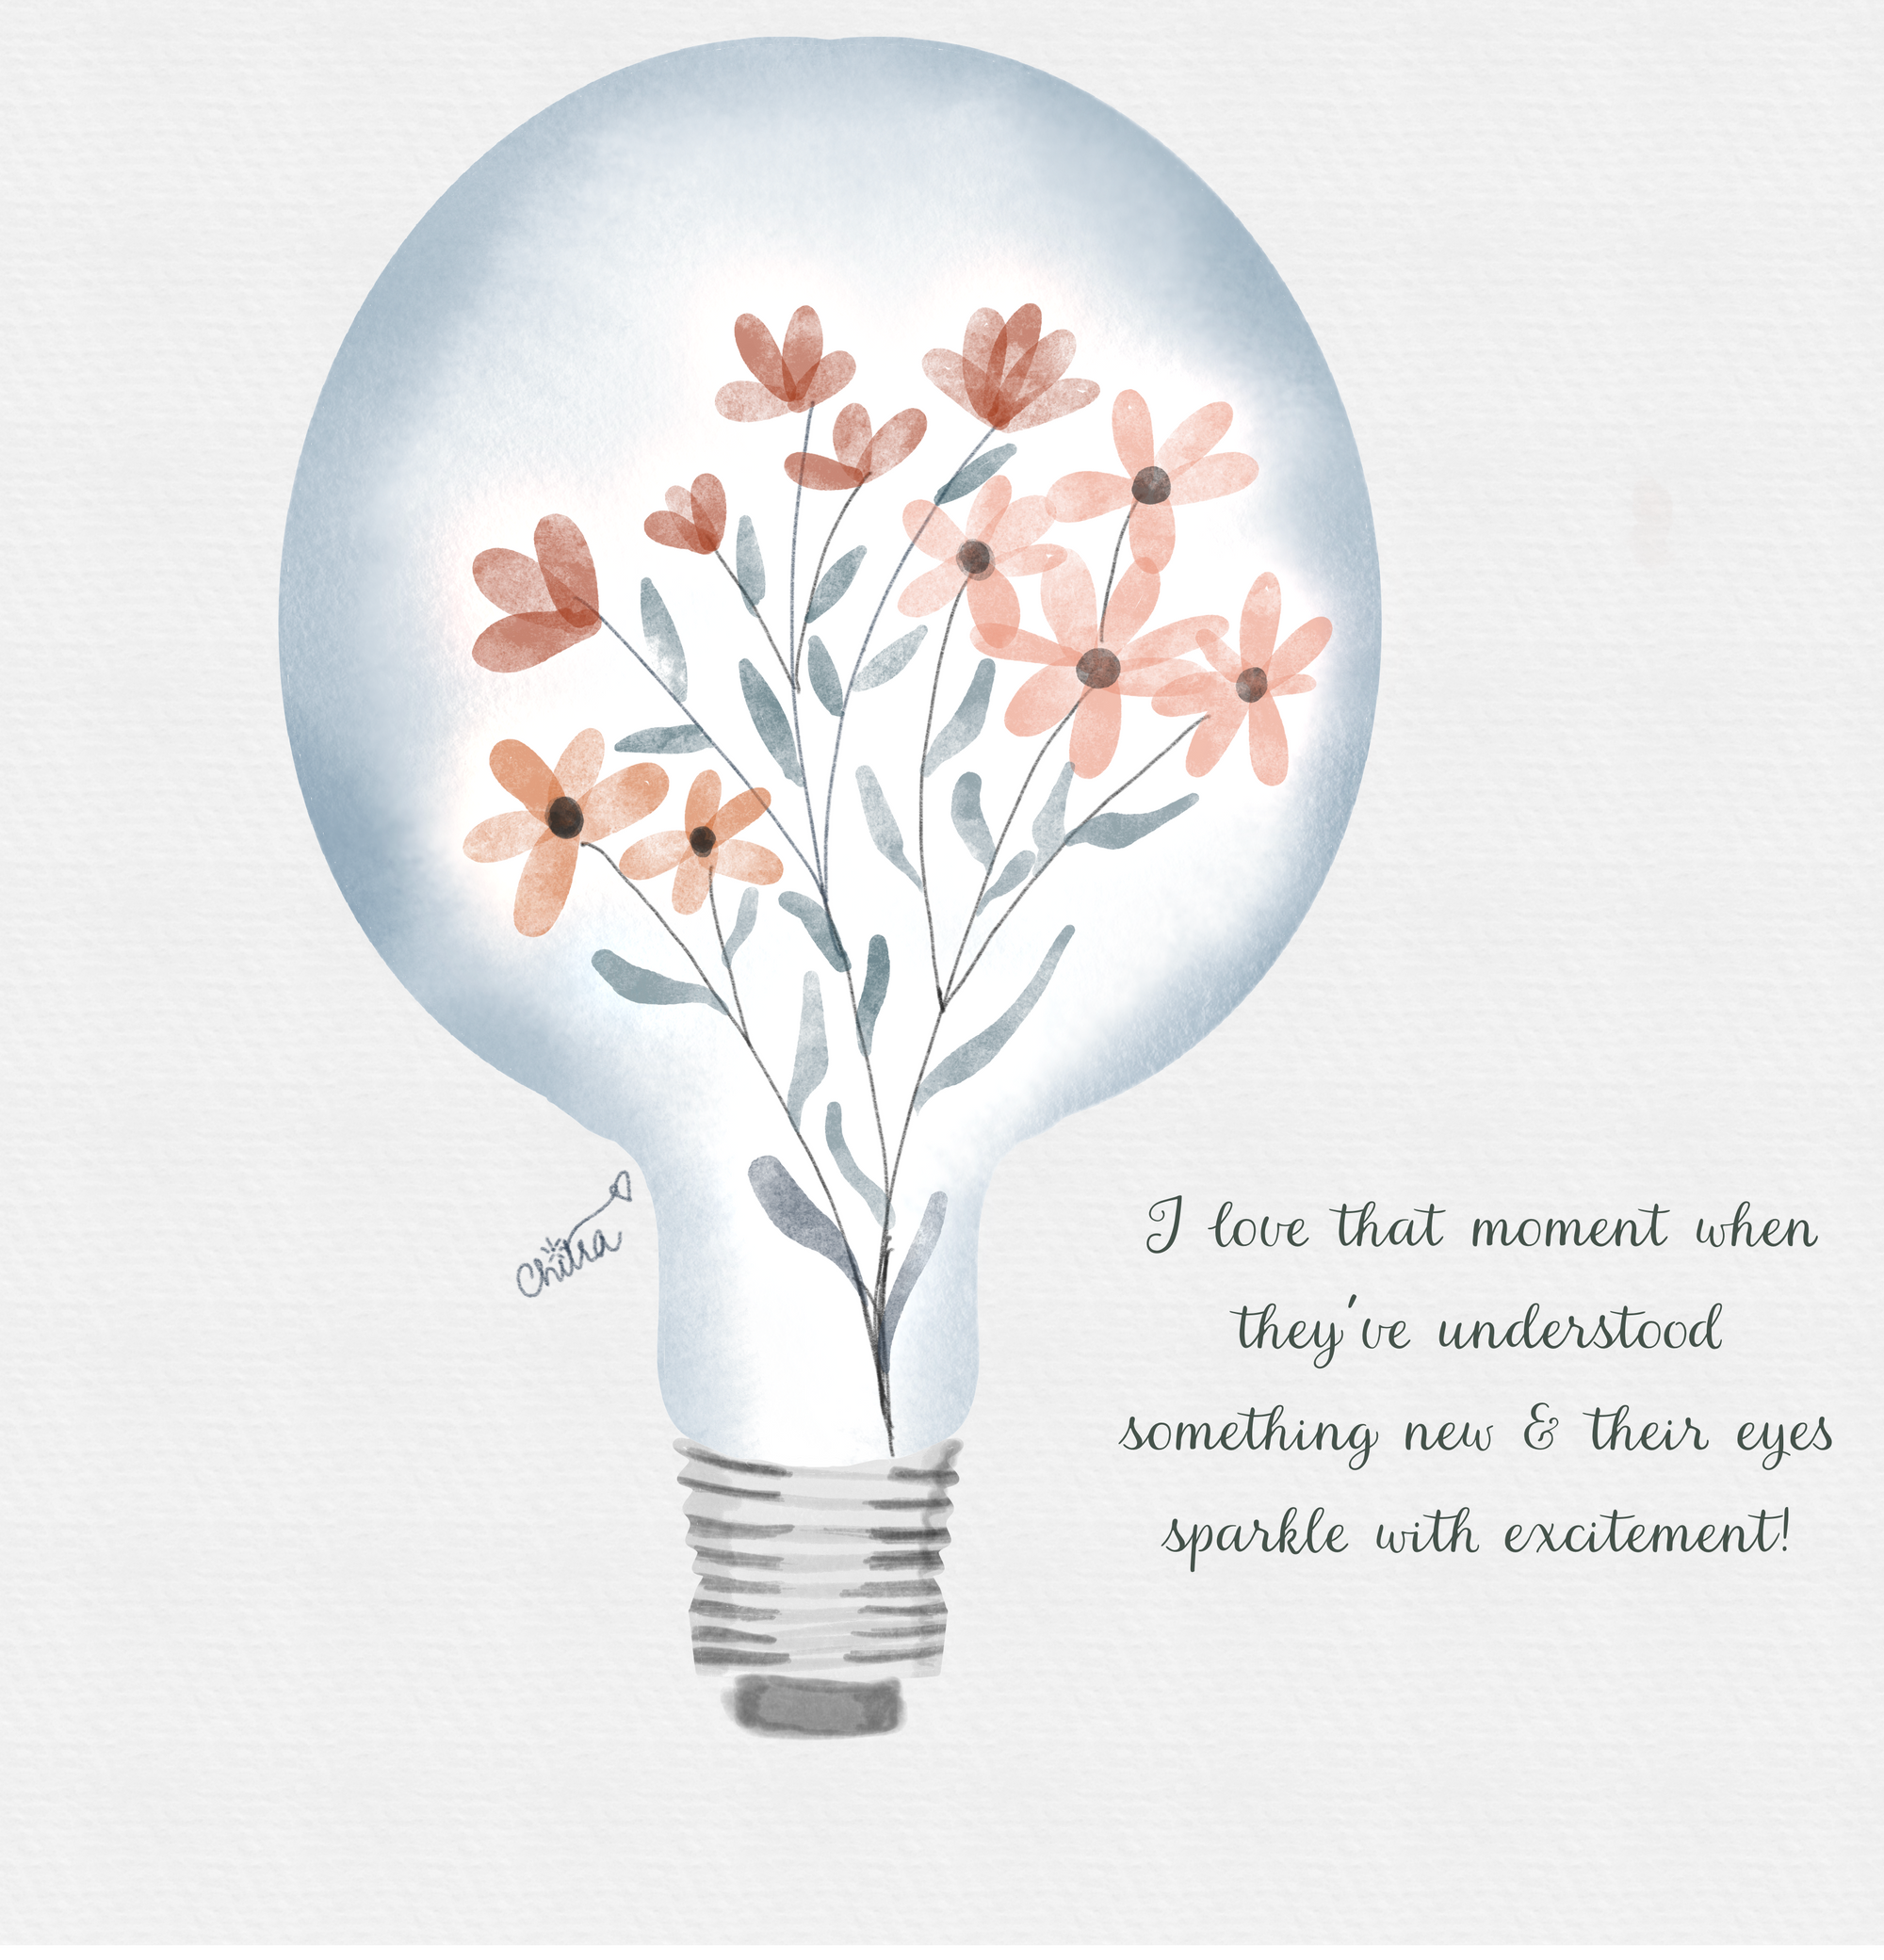 Illustration of a bulb with flowers growing inside it. Contains the quote from Nick's grandfather - "I love that moment when they've understood something new & their eyes sparkle with excitement!